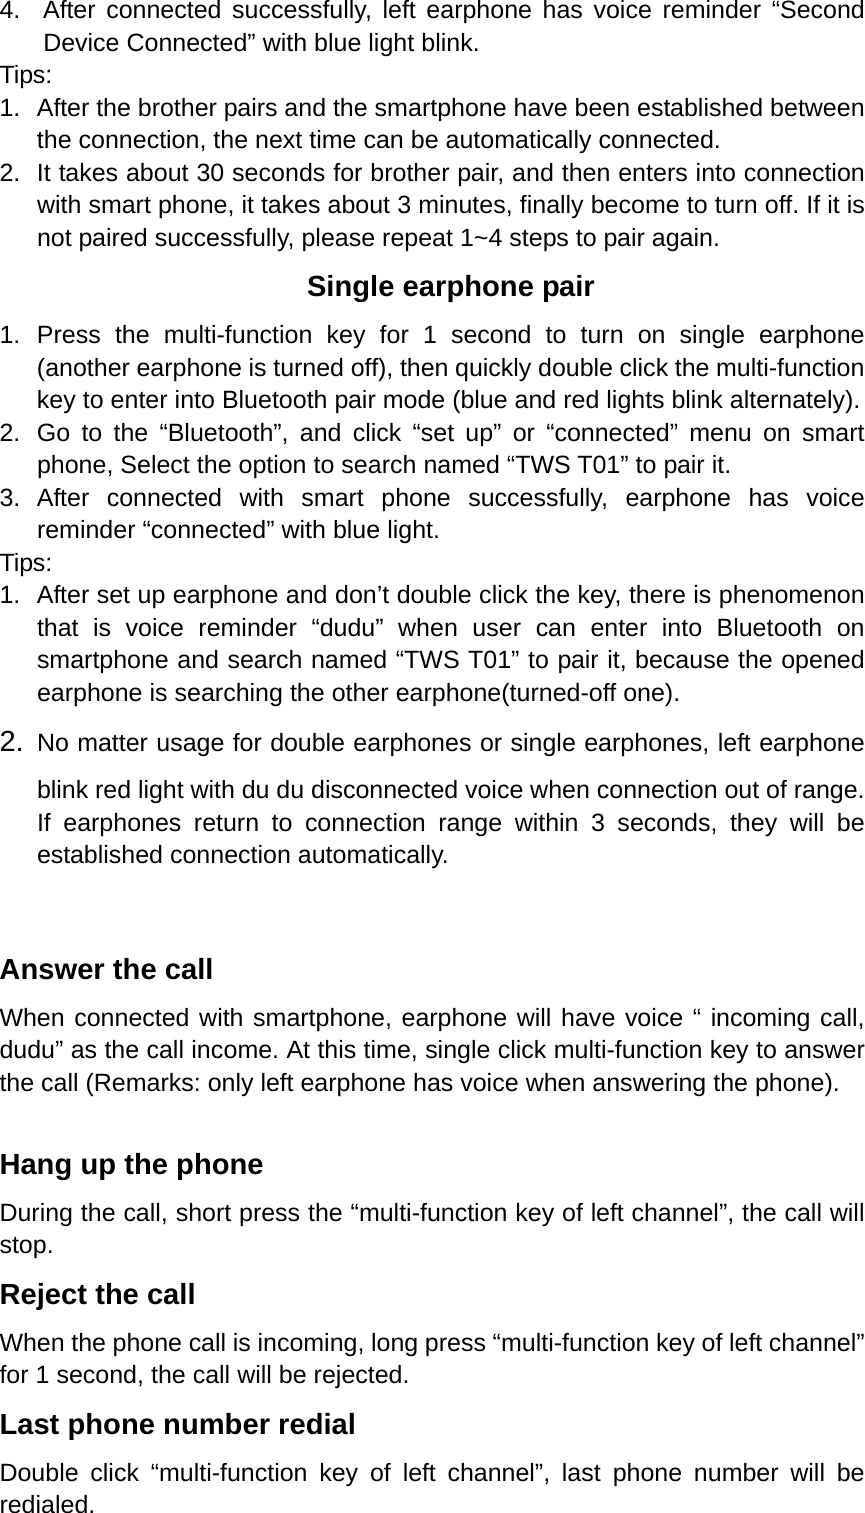 4.  After connected successfully, left earphone has voice reminder “Second Device Connected” with blue light blink. Tips:  1.  After the brother pairs and the smartphone have been established between the connection, the next time can be automatically connected.   2.  It takes about 30 seconds for brother pair, and then enters into connection with smart phone, it takes about 3 minutes, finally become to turn off. If it is not paired successfully, please repeat 1~4 steps to pair again. Single earphone pair 1. Press the multi-function key for 1 second to turn on single earphone (another earphone is turned off), then quickly double click the multi-function key to enter into Bluetooth pair mode (blue and red lights blink alternately). 2.  Go to the “Bluetooth”, and click “set up” or “connected” menu on smart phone, Select the option to search named “TWS T01” to pair it. 3. After connected with smart phone successfully, earphone has voice reminder “connected” with blue light.   Tips: 1.  After set up earphone and don’t double click the key, there is phenomenon that is voice reminder “dudu” when user can enter into Bluetooth on smartphone and search named “TWS T01” to pair it, because the opened earphone is searching the other earphone(turned-off one). 2.  No matter usage for double earphones or single earphones, left earphone blink red light with du du disconnected voice when connection out of range. If earphones return to connection range within 3 seconds, they will be established connection automatically.  Answer the call When connected with smartphone, earphone will have voice “ incoming call, dudu” as the call income. At this time, single click multi-function key to answer the call (Remarks: only left earphone has voice when answering the phone).  Hang up the phone During the call, short press the “multi-function key of left channel”, the call will stop. Reject the call When the phone call is incoming, long press “multi-function key of left channel” for 1 second, the call will be rejected. Last phone number redial Double click “multi-function key of left channel”, last phone number will be redialed. 